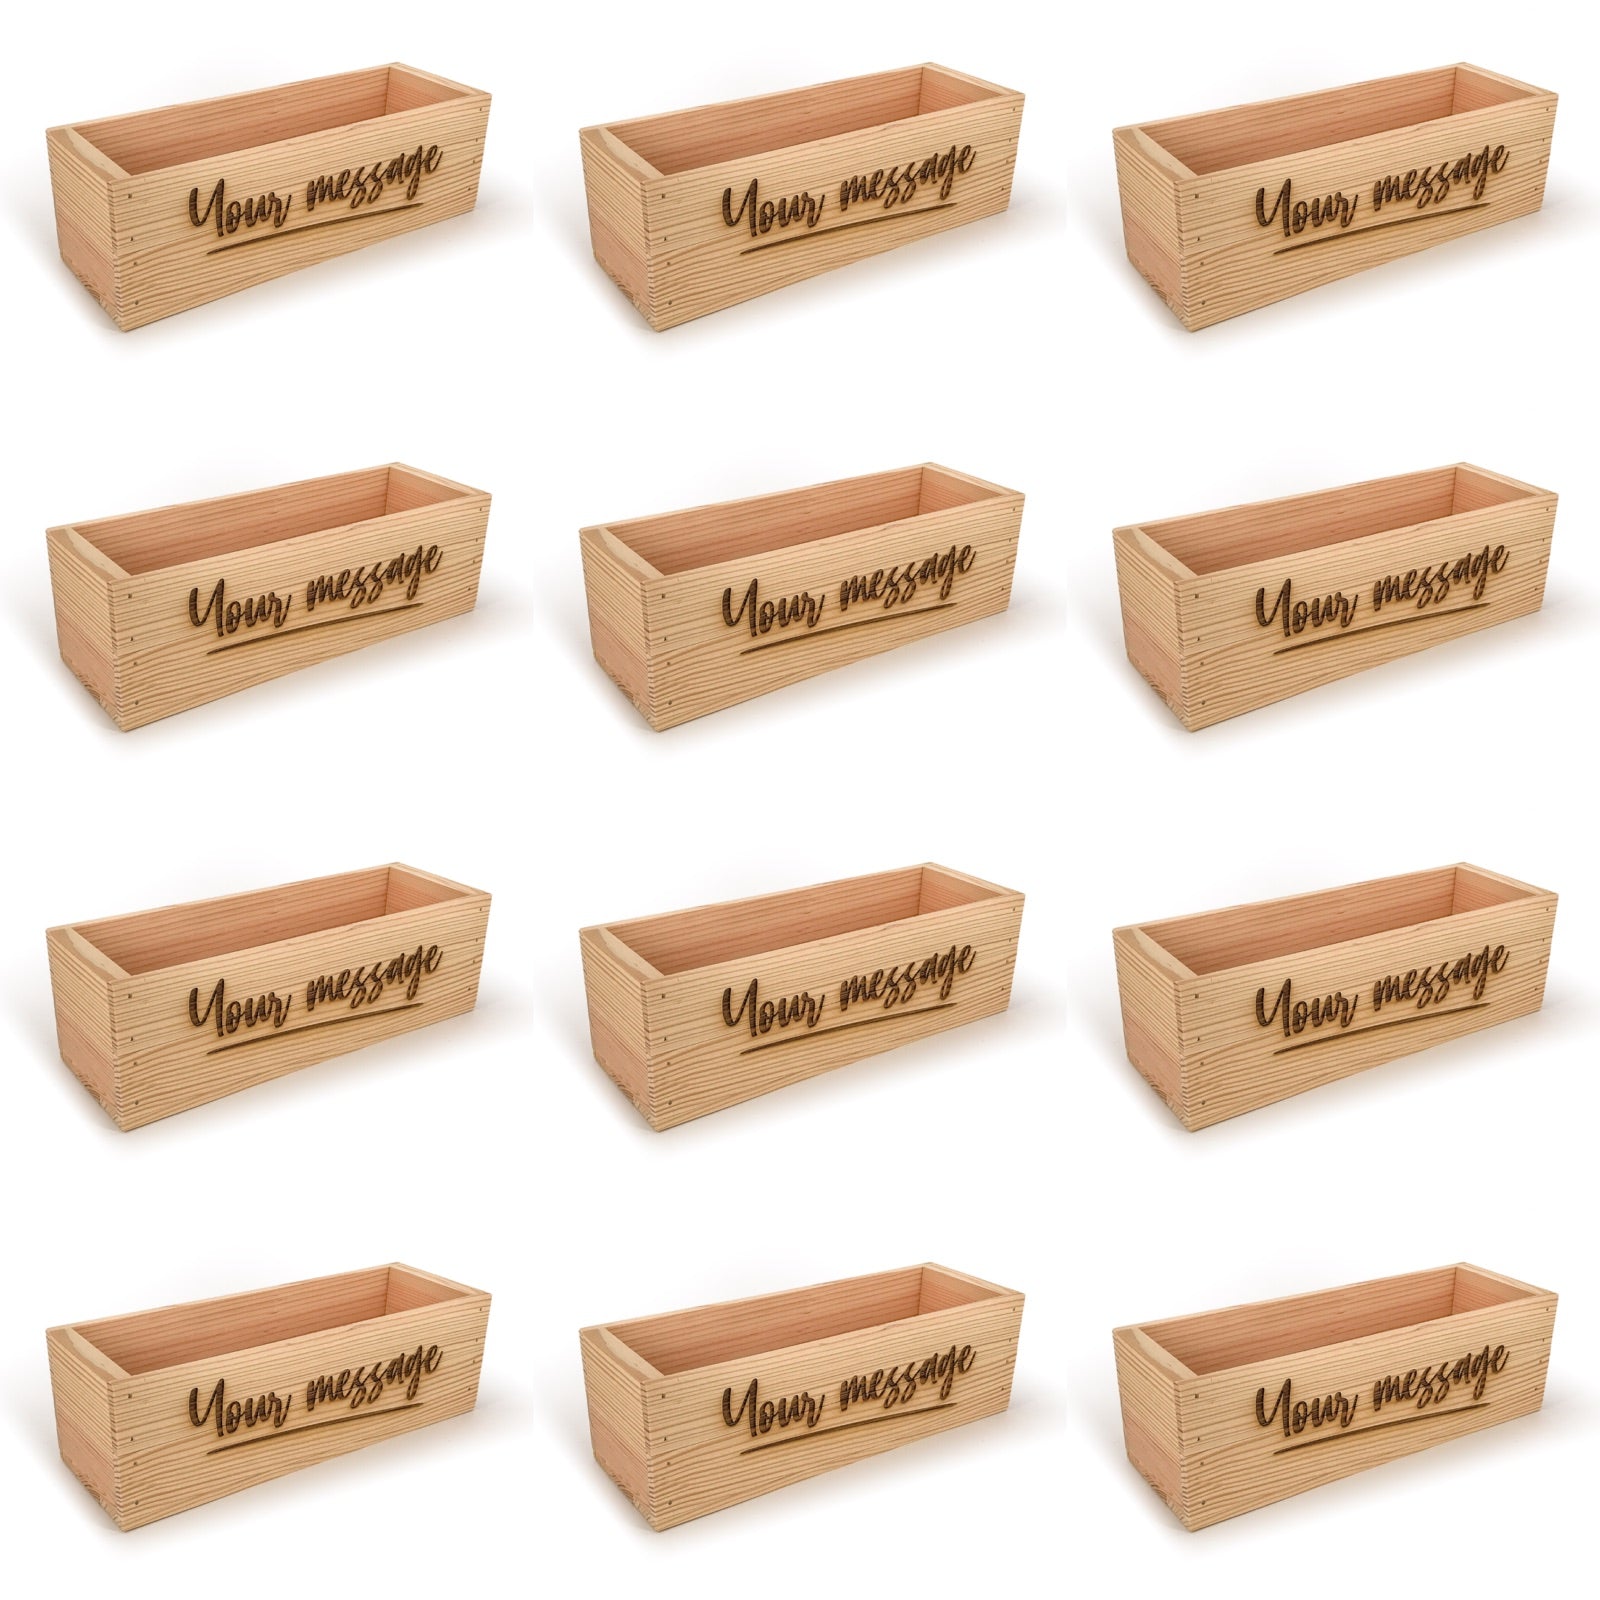 12 Single Bottle Wine Crate Box with Custom Message 14x4.5x4.5